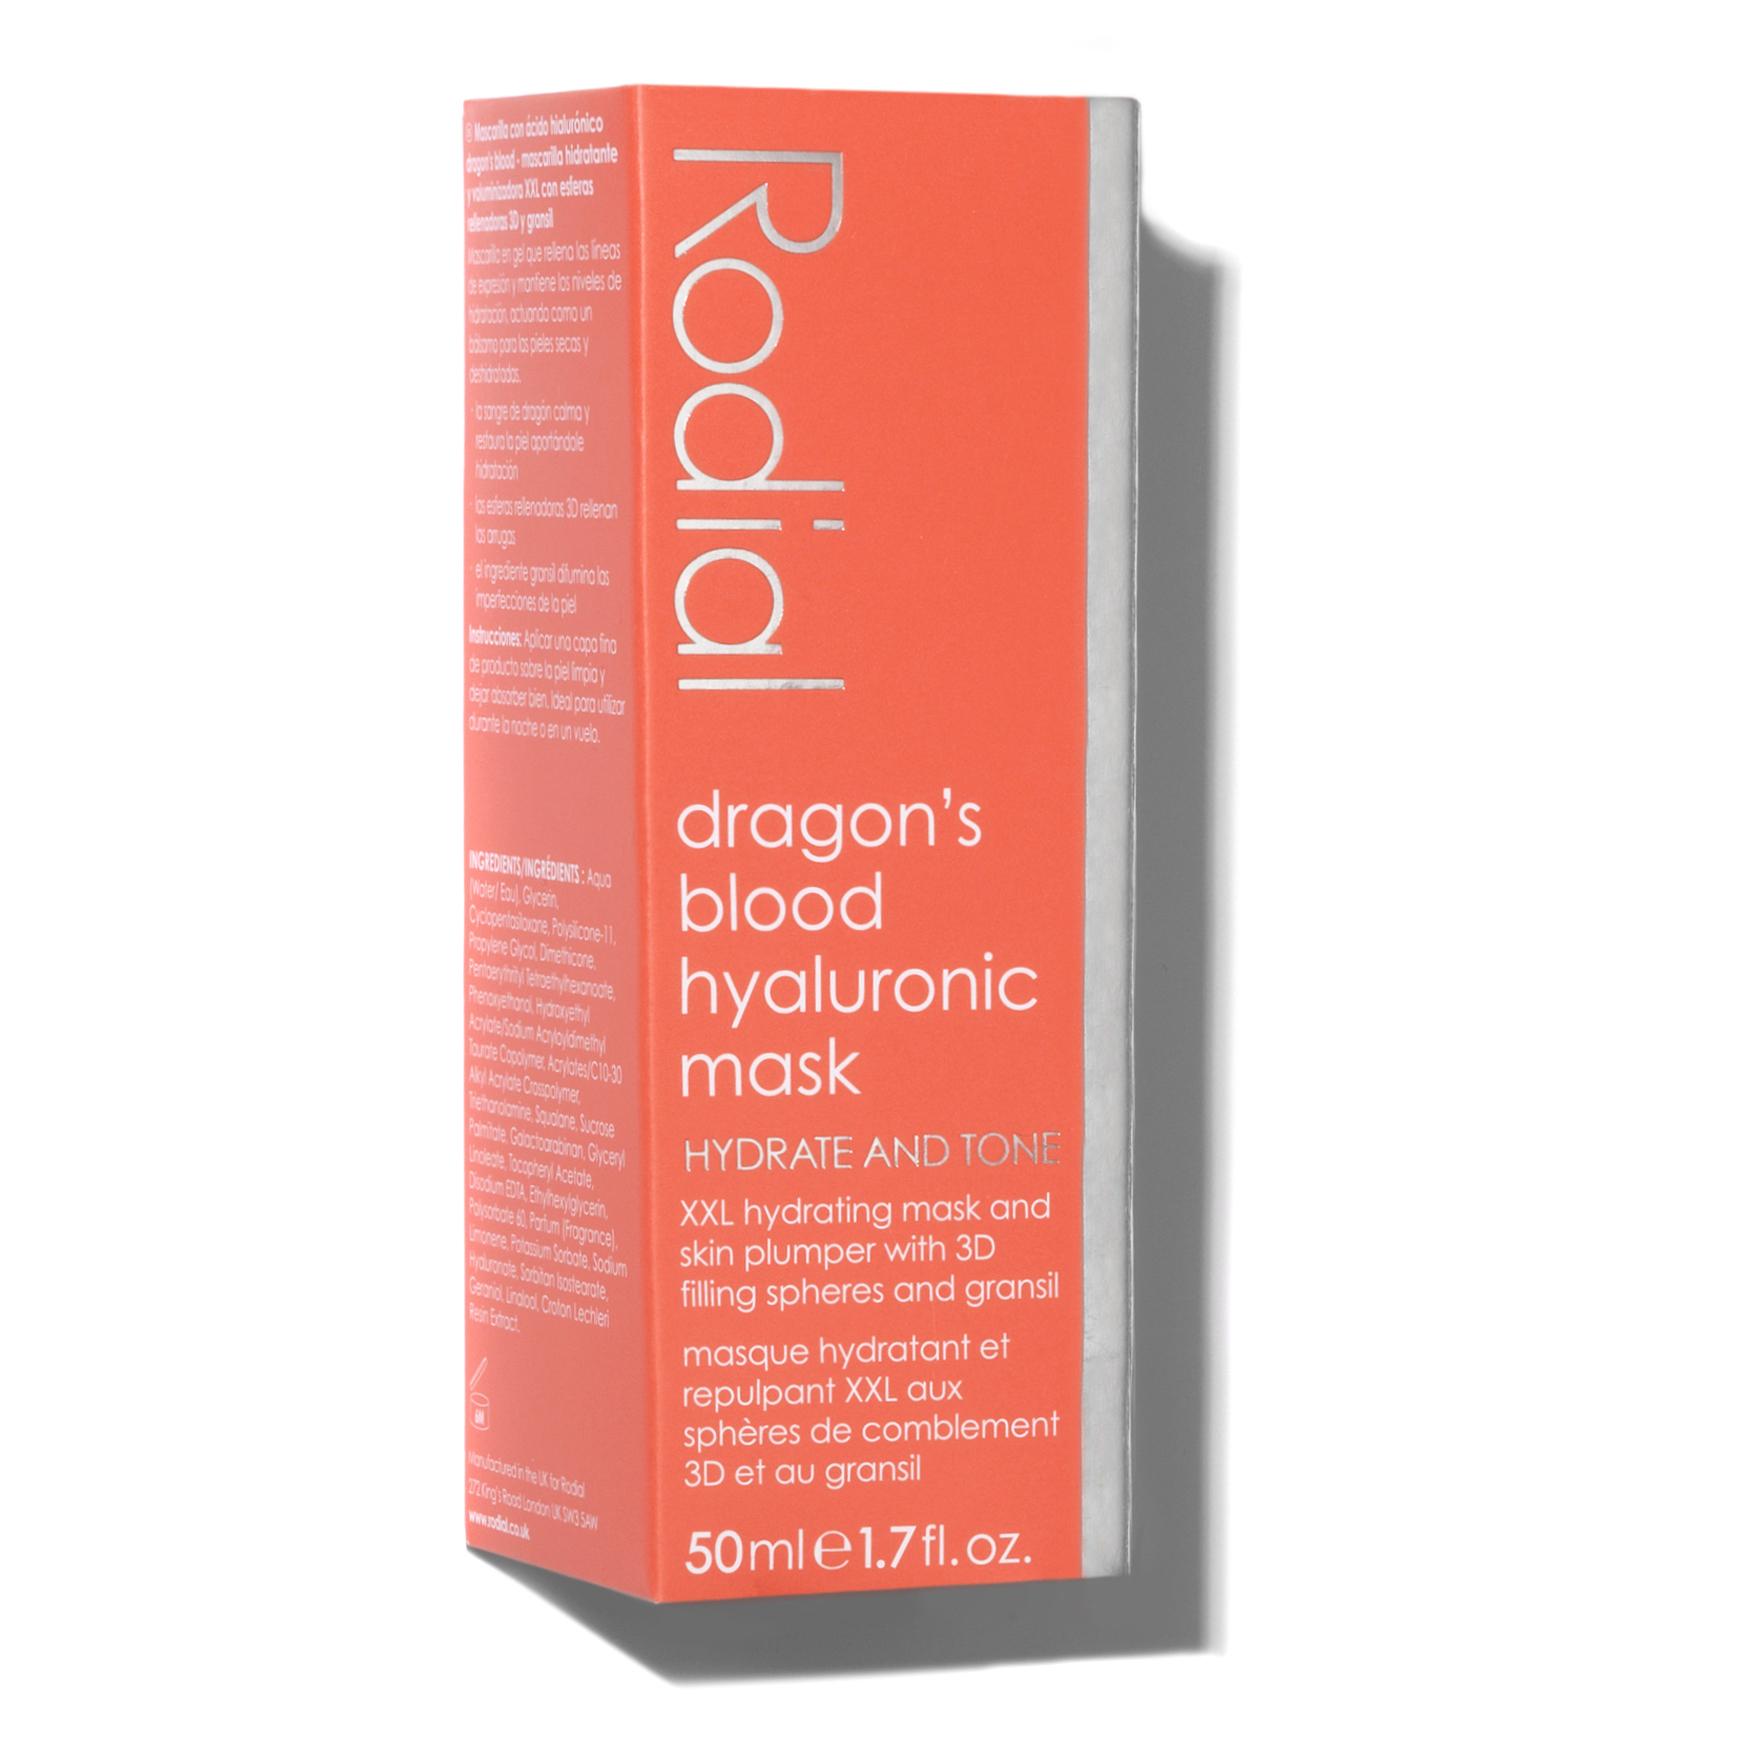 Rodial Dragon's Hyaluronic Mask Space NK